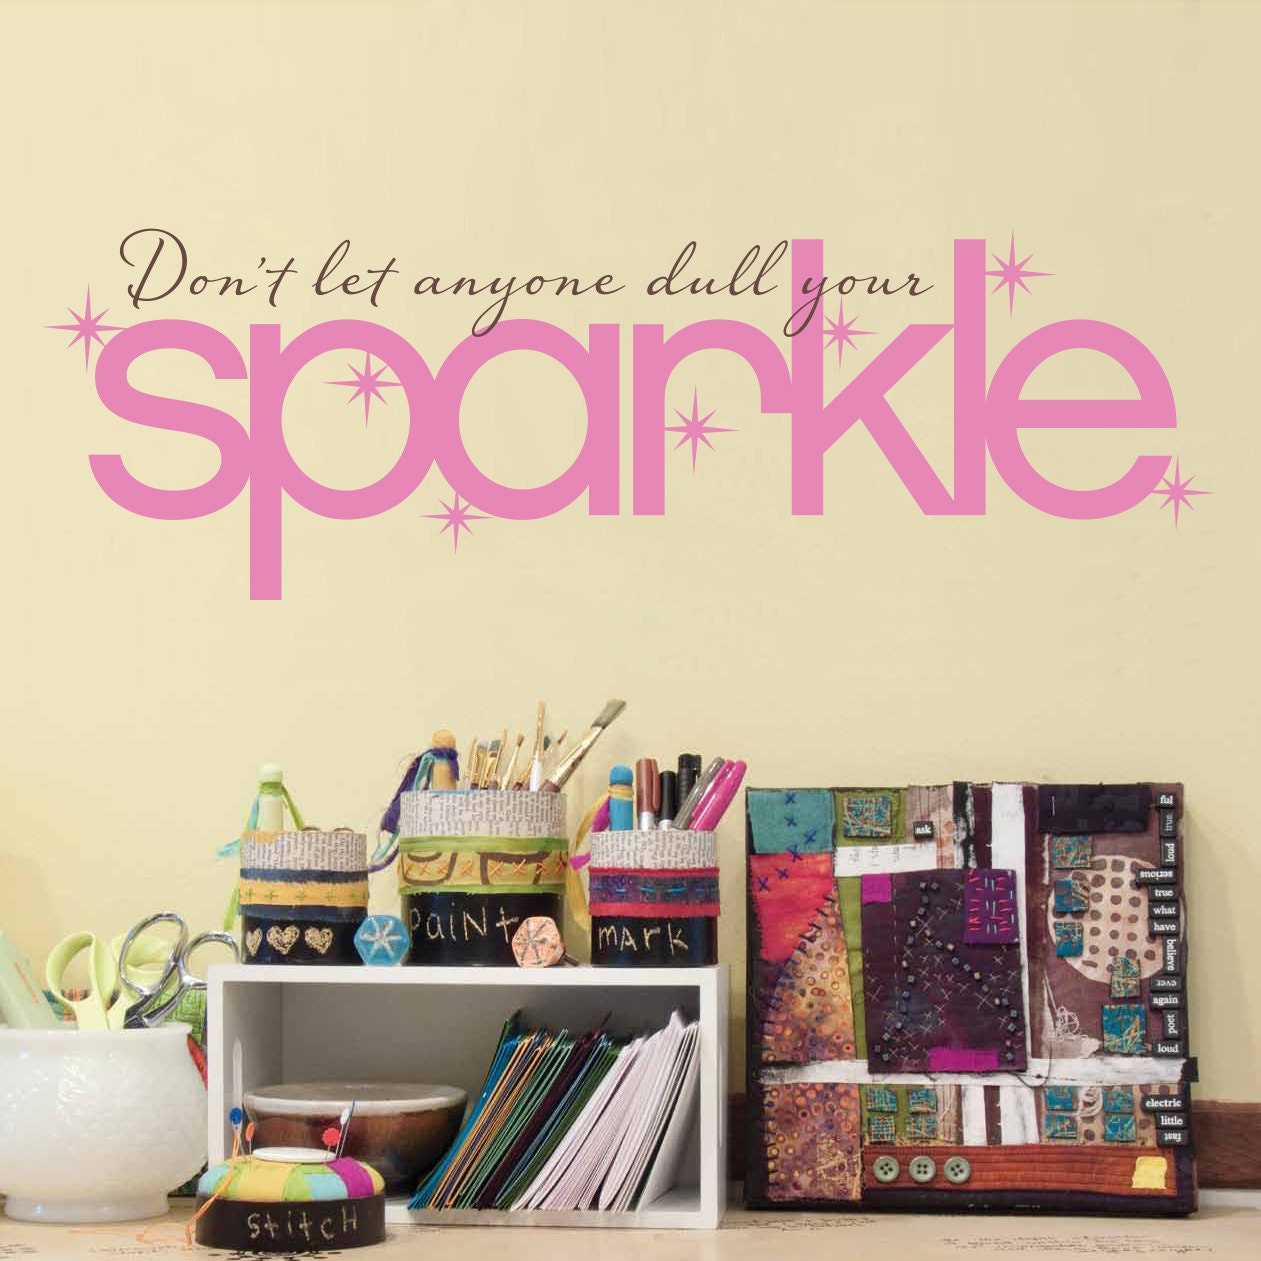 Sparkle Wall Decal - Don't let anyone dull your sparkle Quote - Sparkle Decal - Girl Wall Decor - Medium